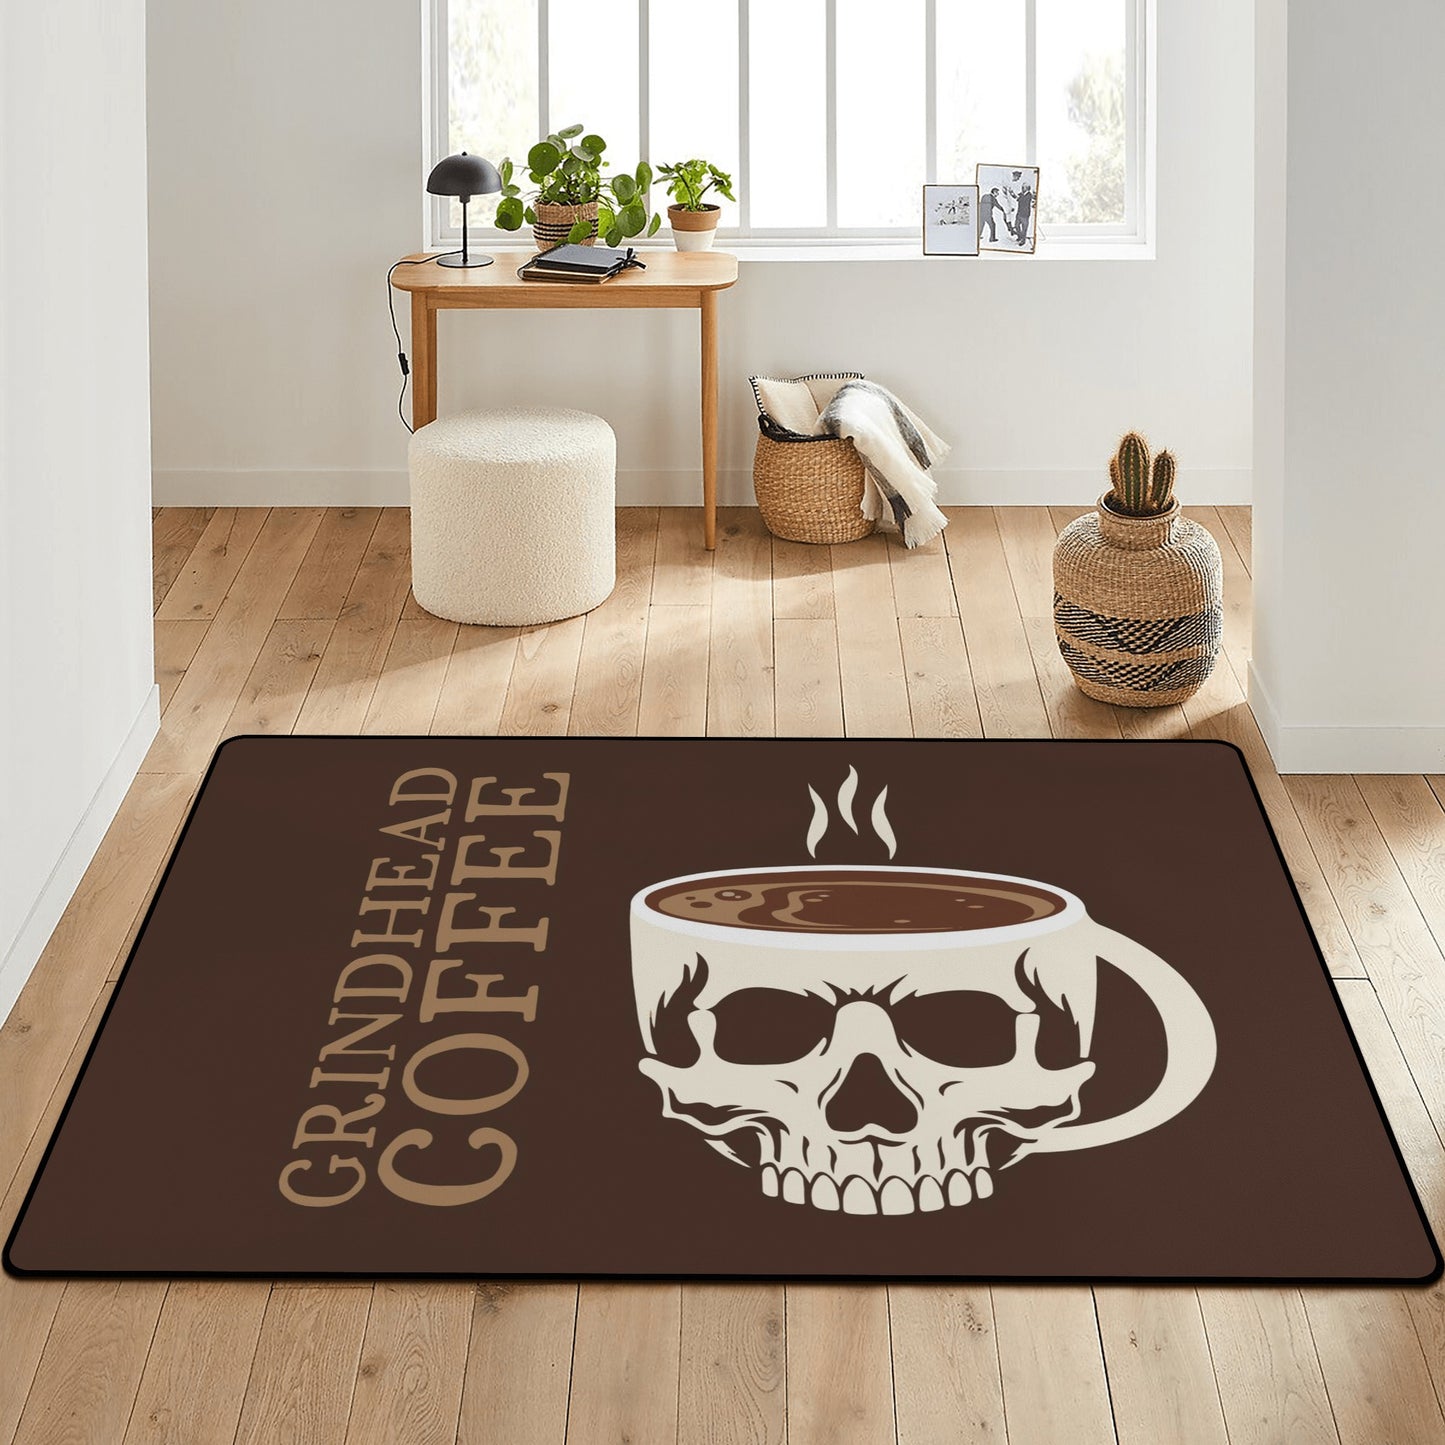 Grindhead Area Rug - 5 Ft x 3 Ft - Free Shipping!